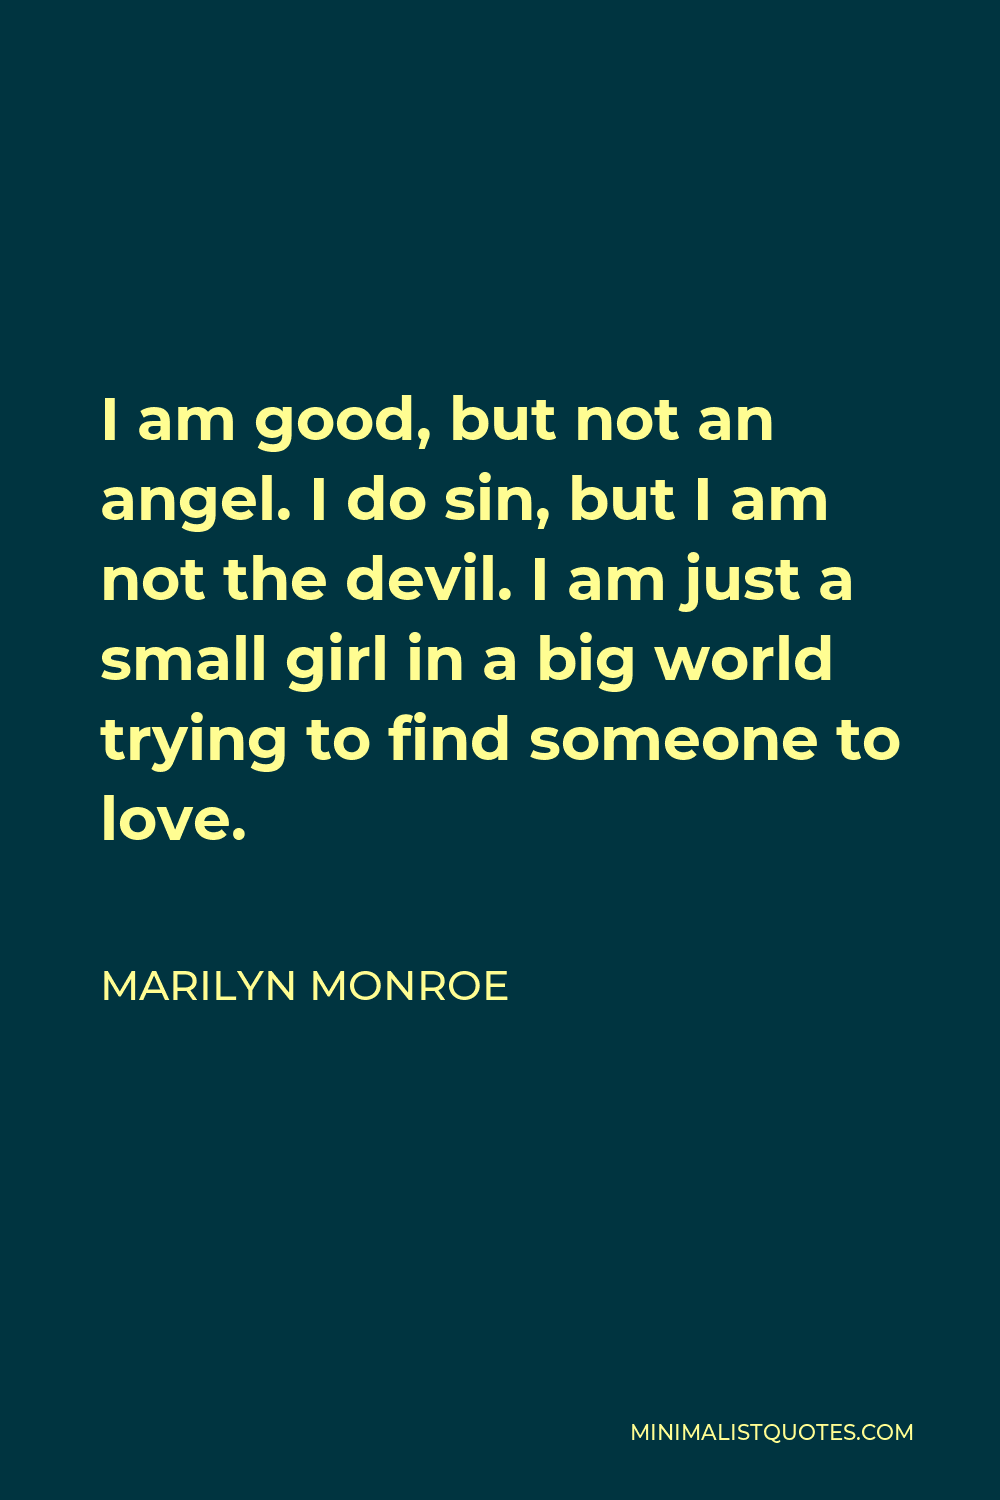 Marilyn Monroe Quote - I am good, but not an angel. I do sin, but I am not the devil. I am just a small girl in a big world trying to find someone to love.